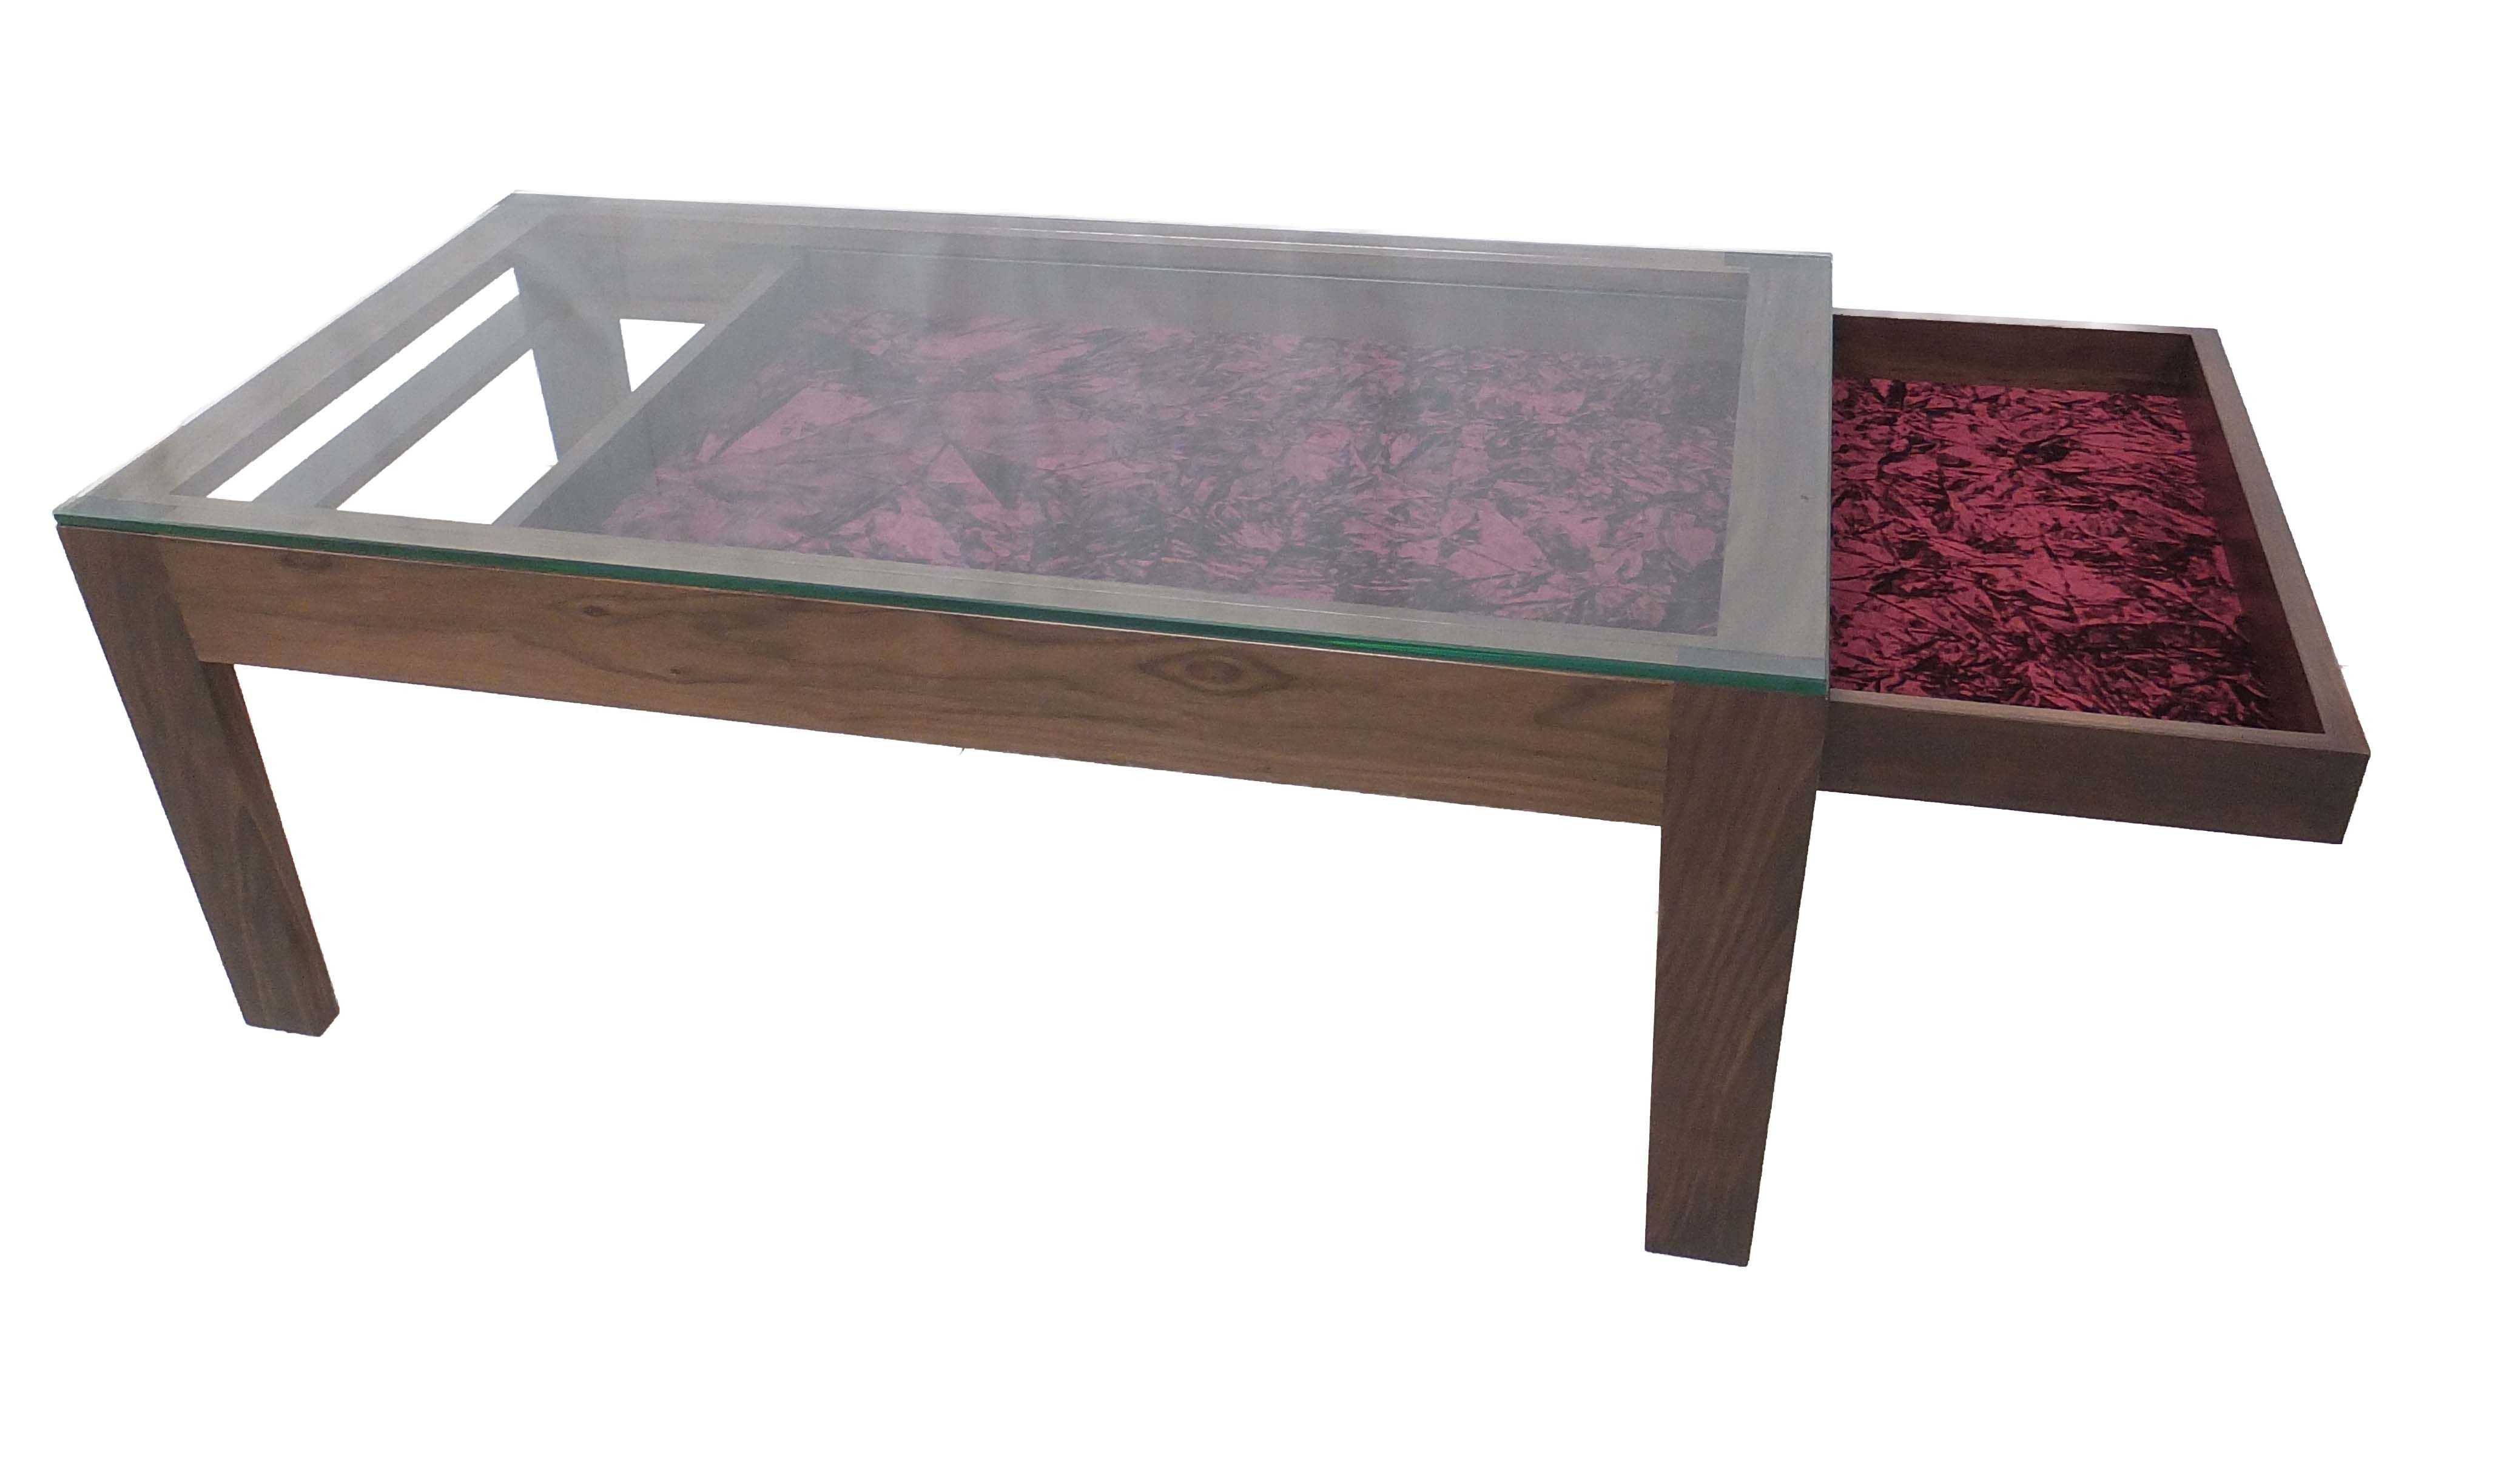 Glass Display Coffee Tables Made From Solid American Walnut With 10mm Toughened Glass Top And Sliding Drawer Lined With Crushed Velvet (View 8 of 10)